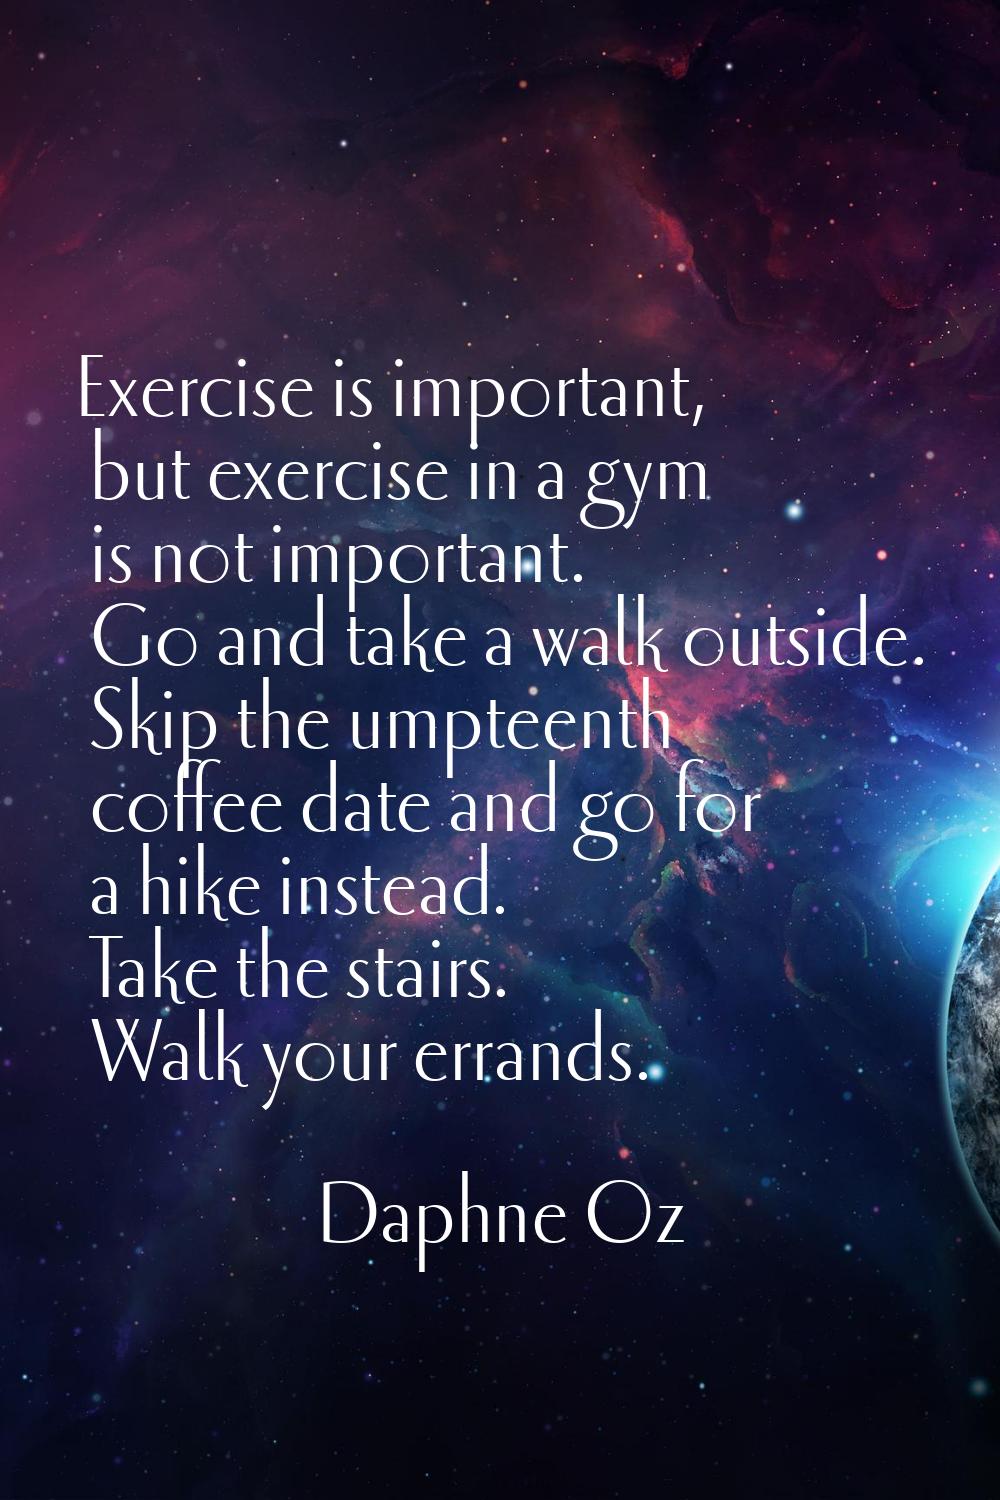 Exercise is important, but exercise in a gym is not important. Go and take a walk outside. Skip the